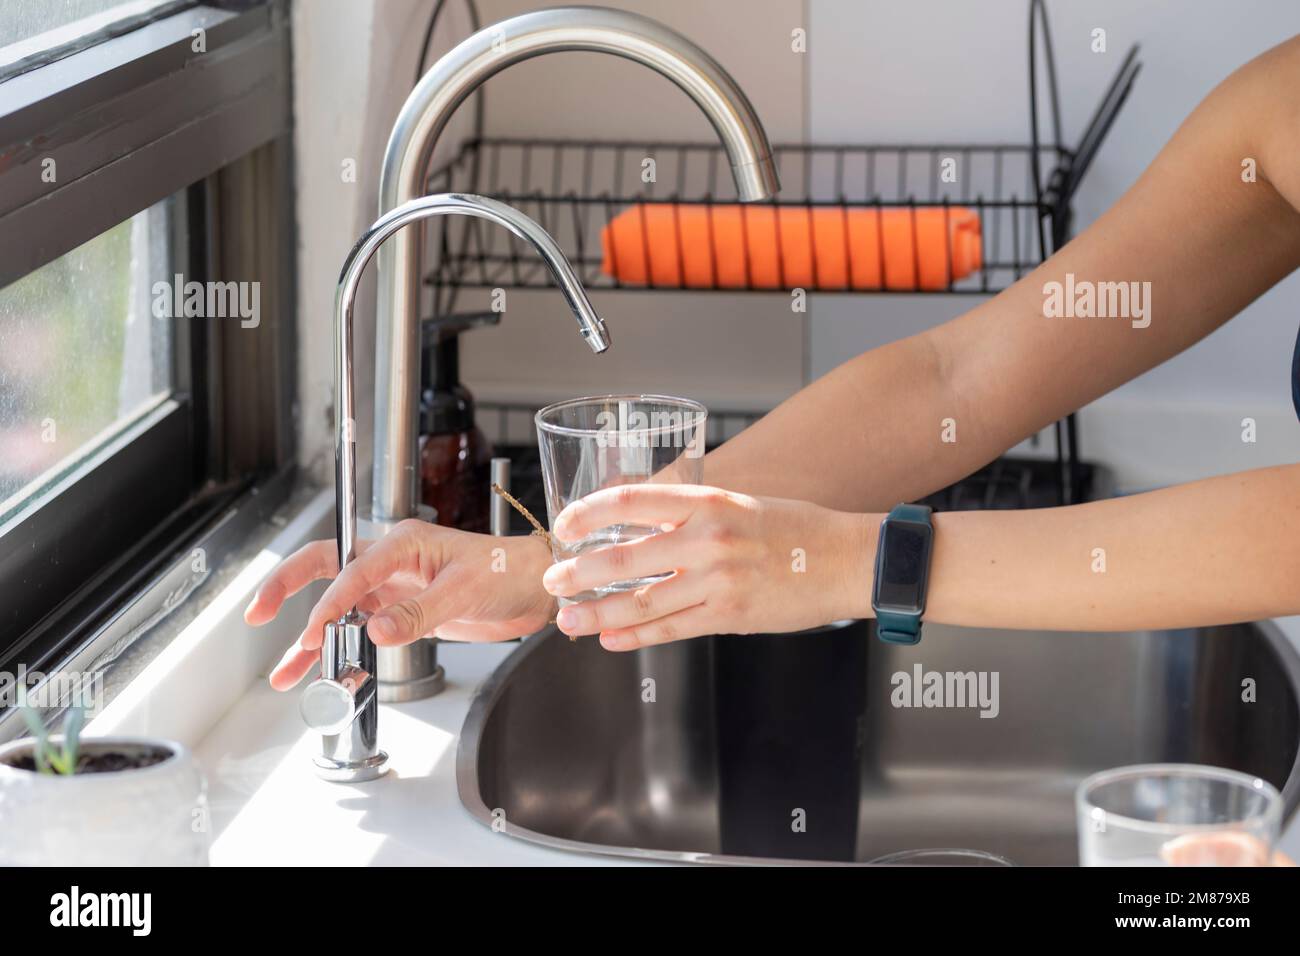 Woman's hands holding a glass that fills with water from the tap filter. Stock Photo